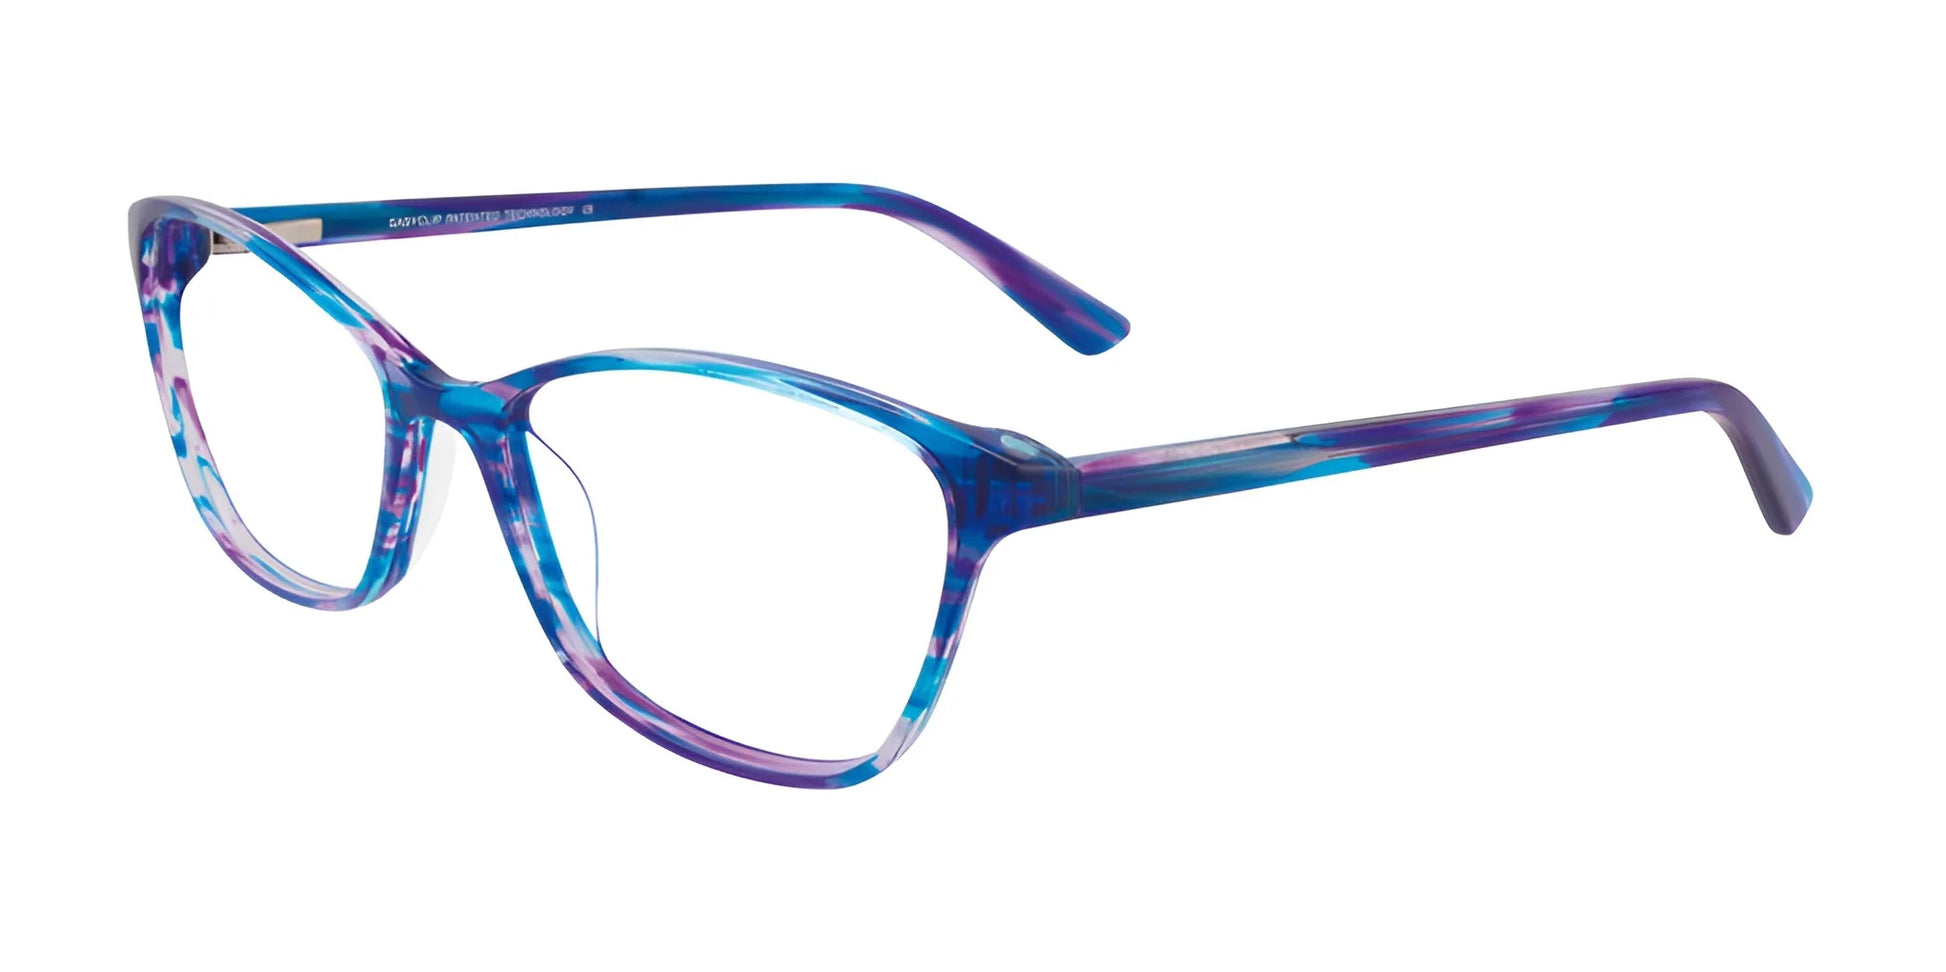 EasyClip EC428 Eyeglasses with Clip-on Sunglasses Blue & Purple Marbled